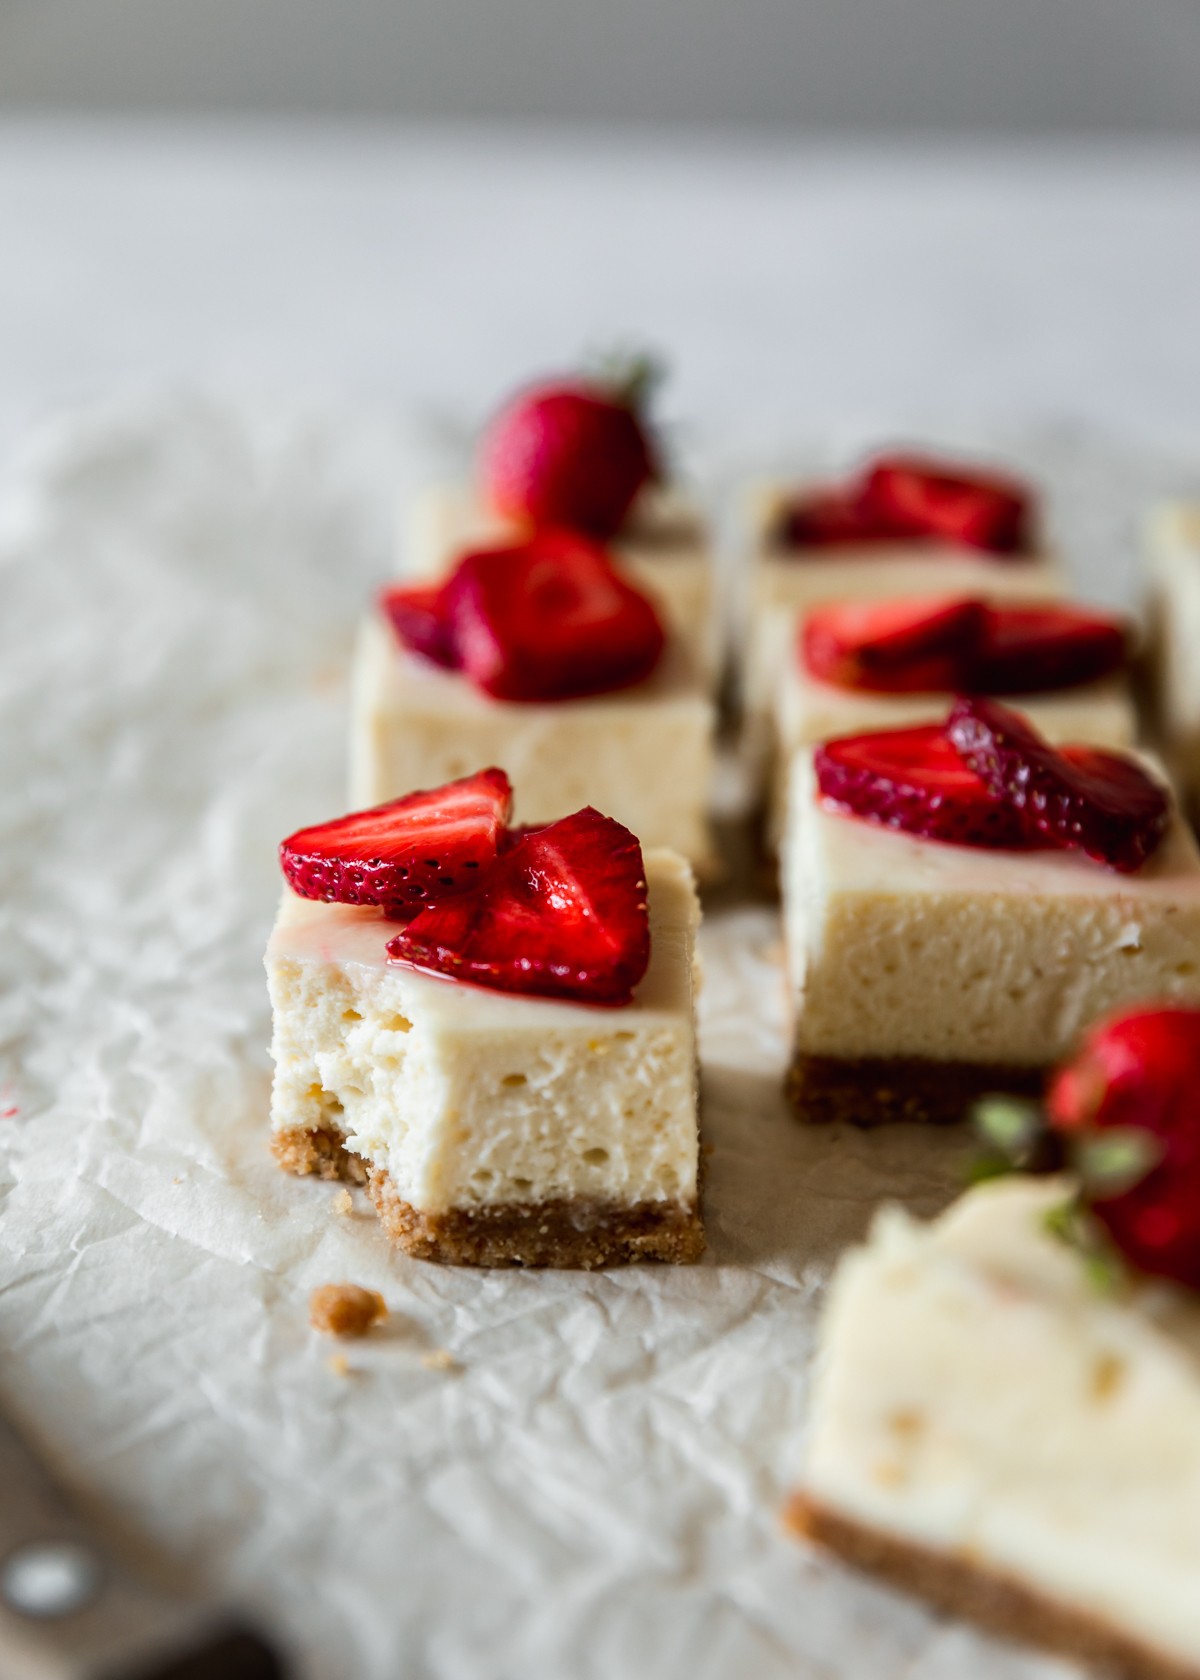 A closeup image of a strawberry cheesecake bar with a bite taken out of it on white parchment paper surrounded by rows of more bars.